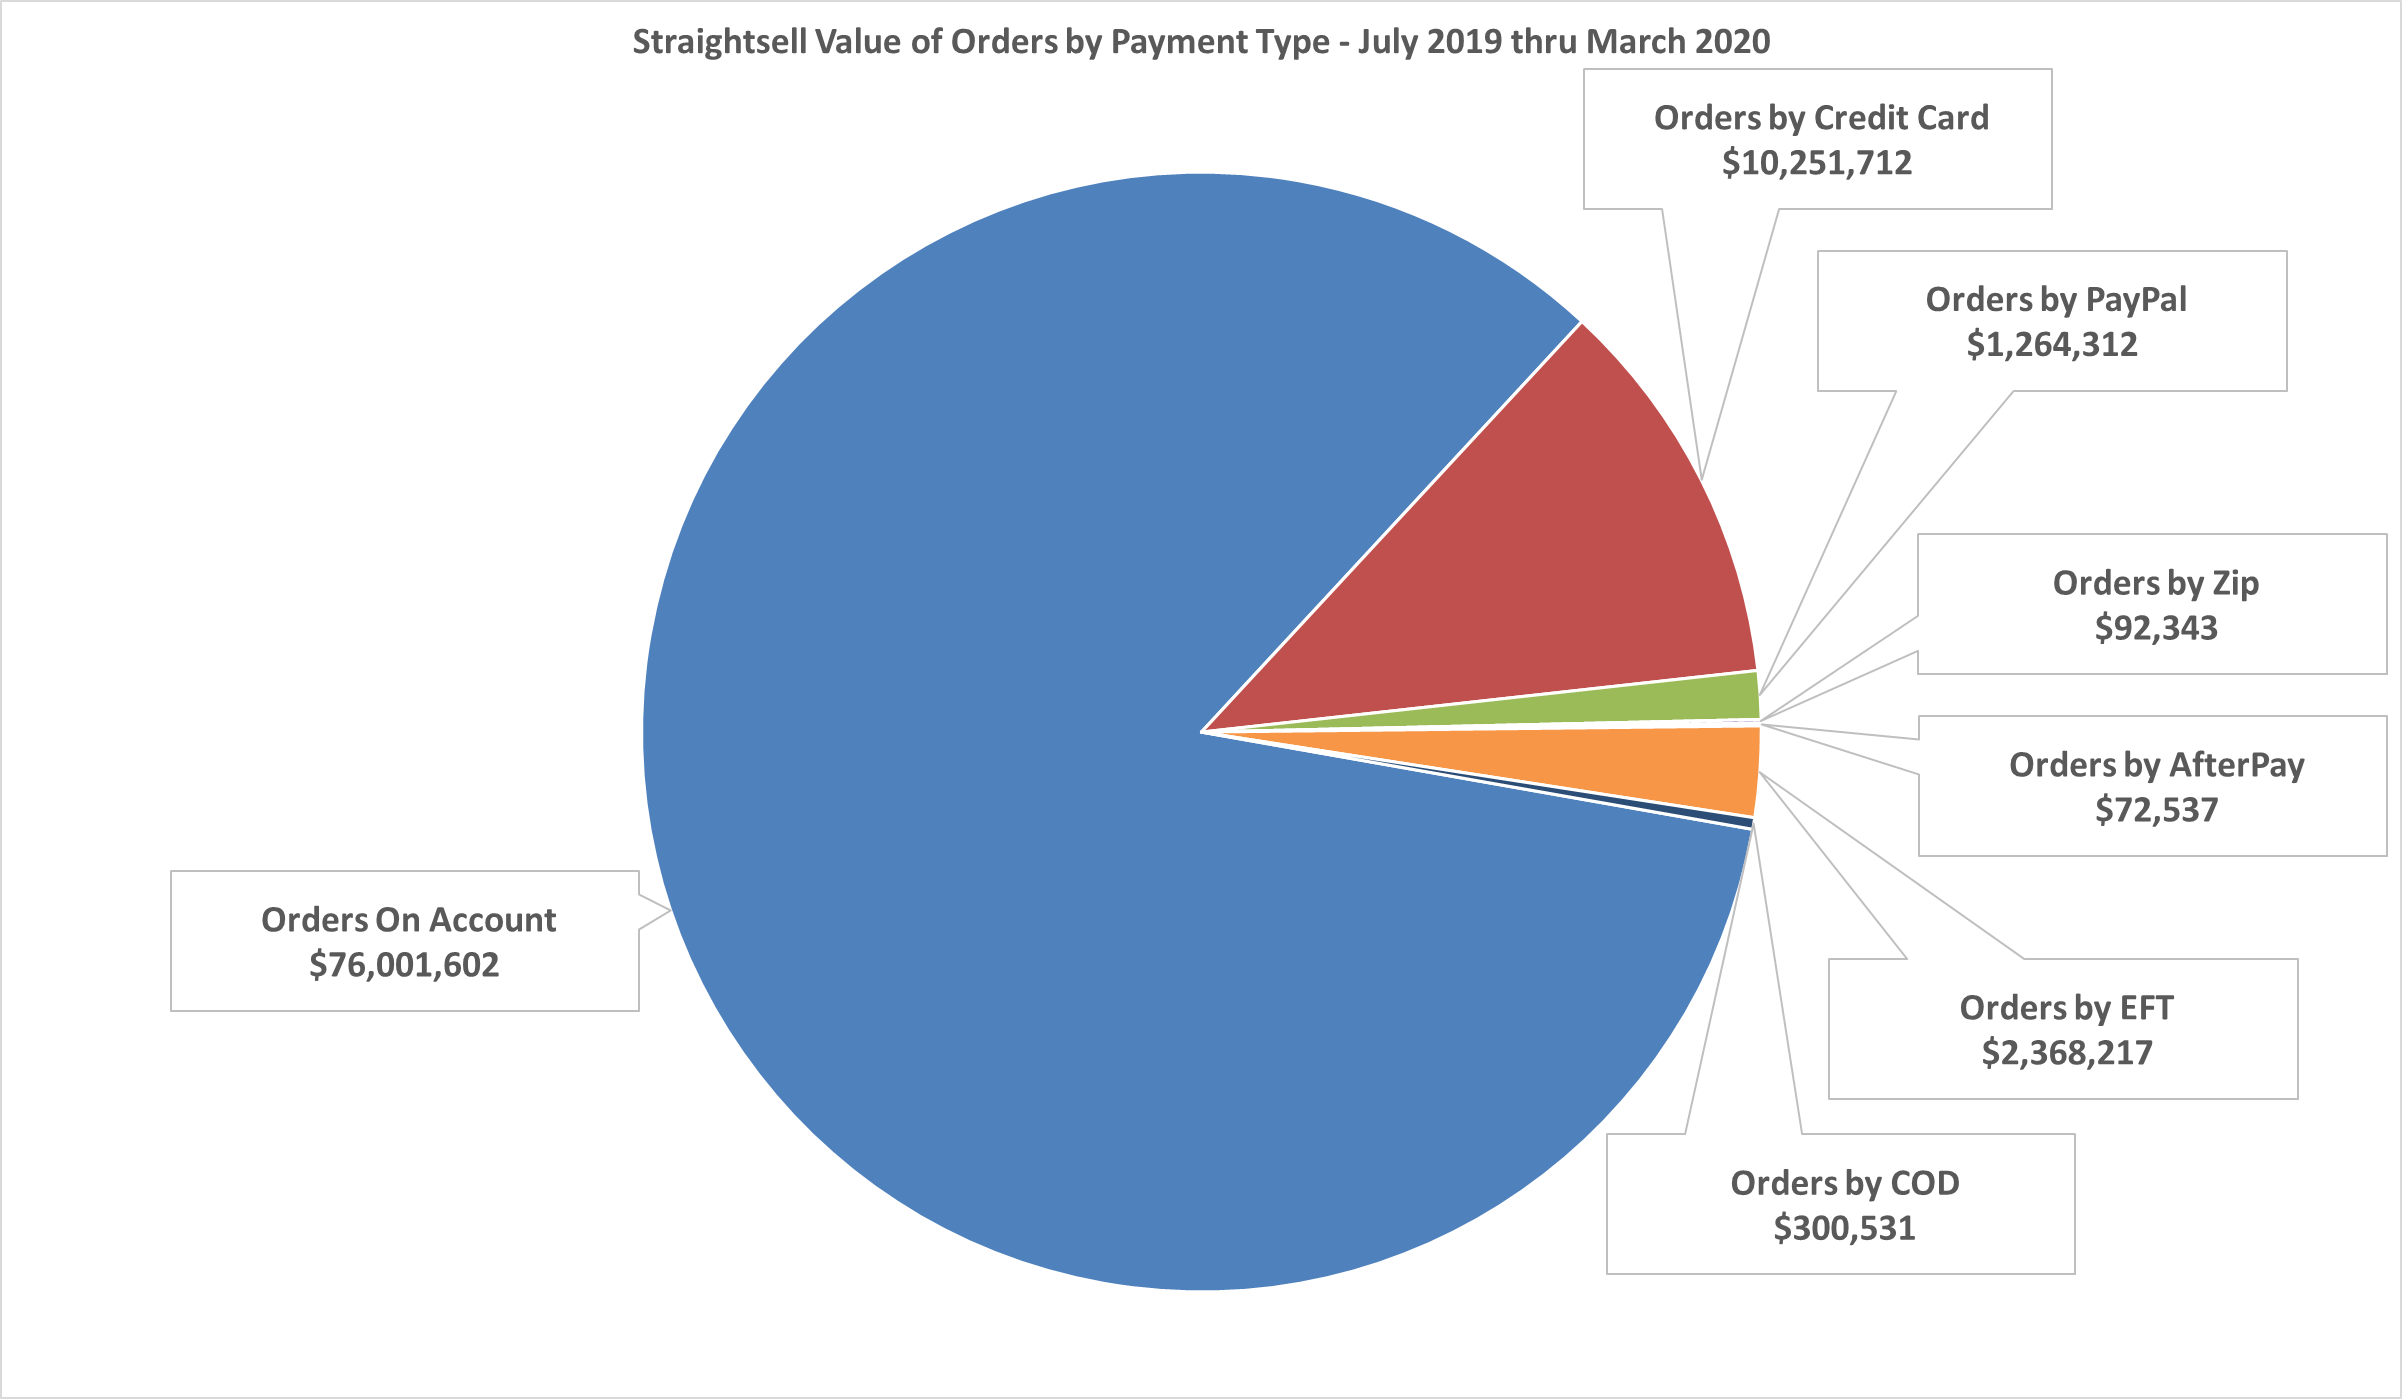 Straightsell Value of Orders by Payment Type - July 2019 thru March 2020